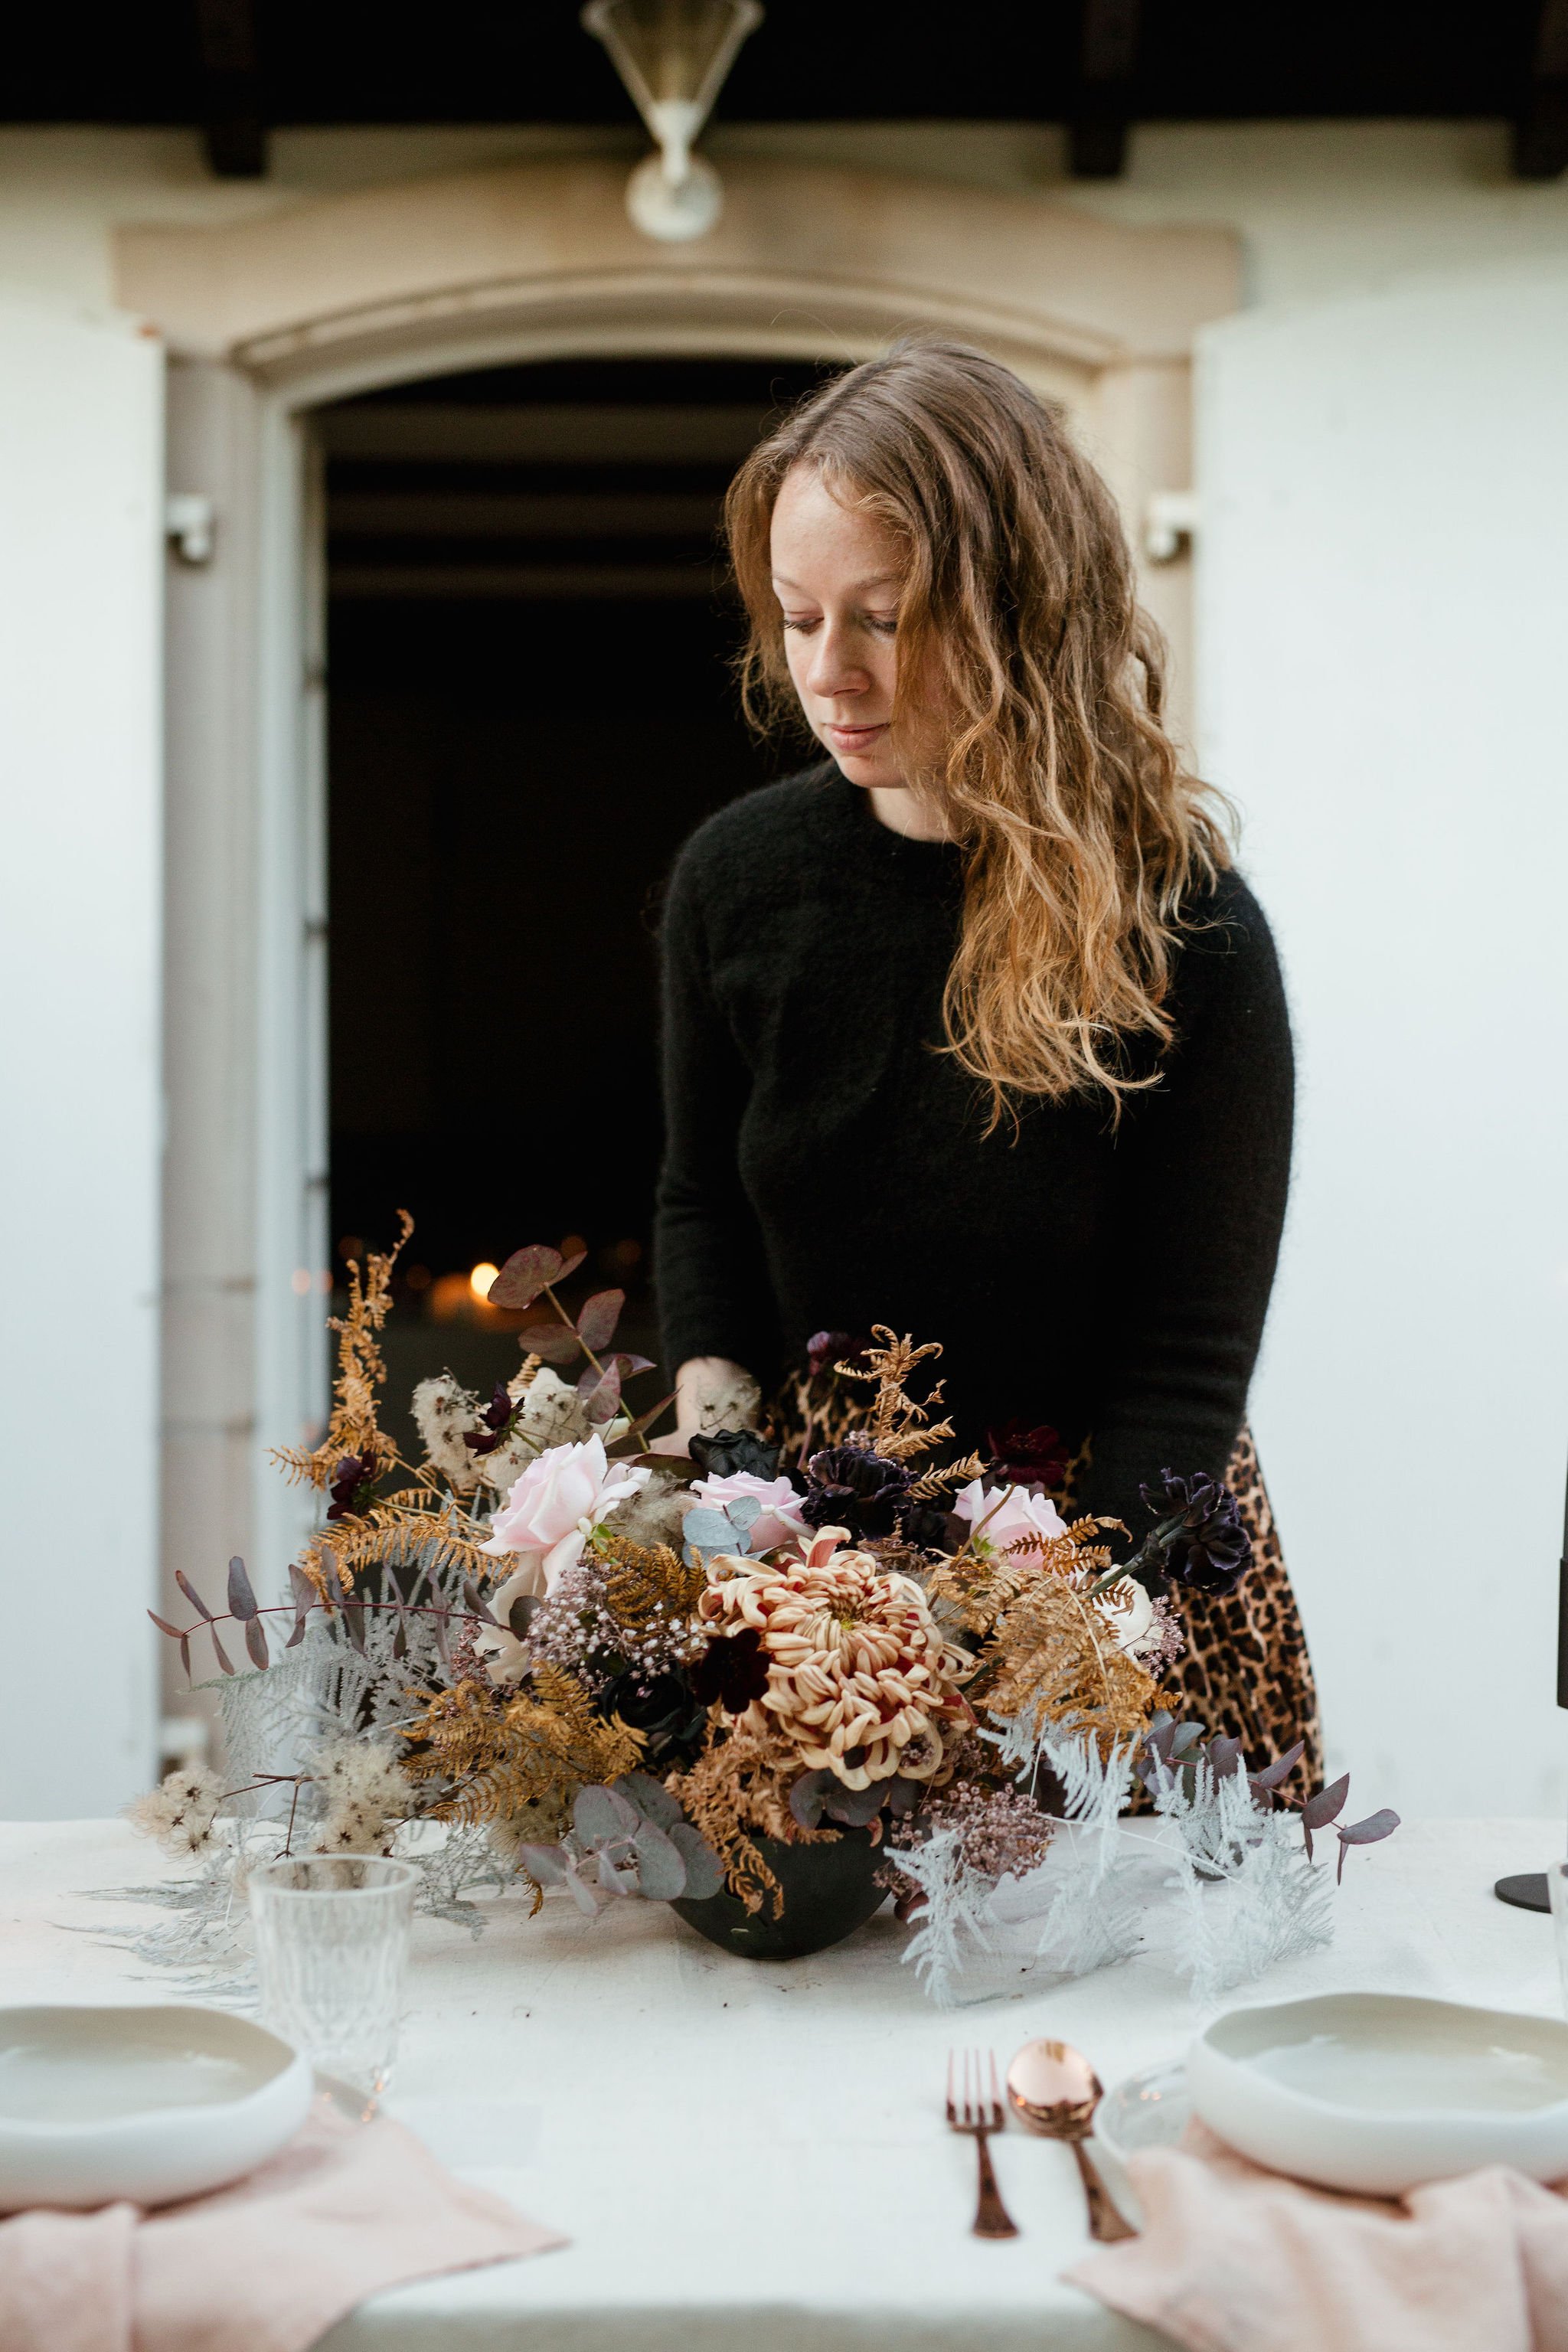 A wedding planner arranging flowers on a table at Chateau de Courtomer.